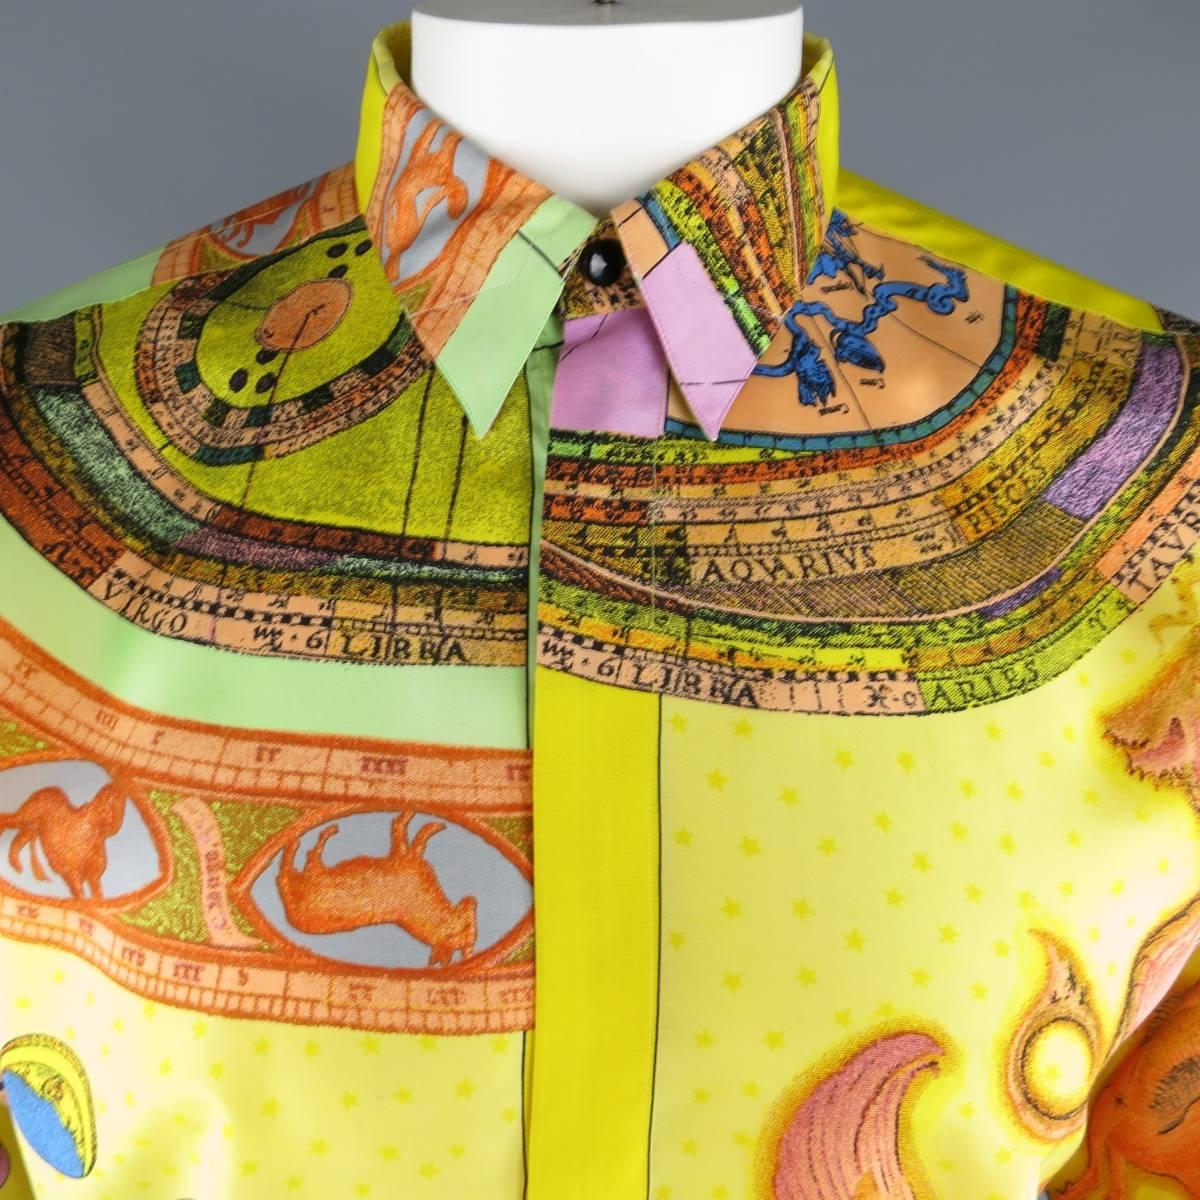 This rare vintage 1990's GIANNI VERSACE shirt comes in a yellow silk with all over multi-color zodiac print in an oversized, drop shoulder fit with a hidden placket button closure. Made in Italy.
 
Excellent Pre-Owned Condition.
Marked: IT 50
